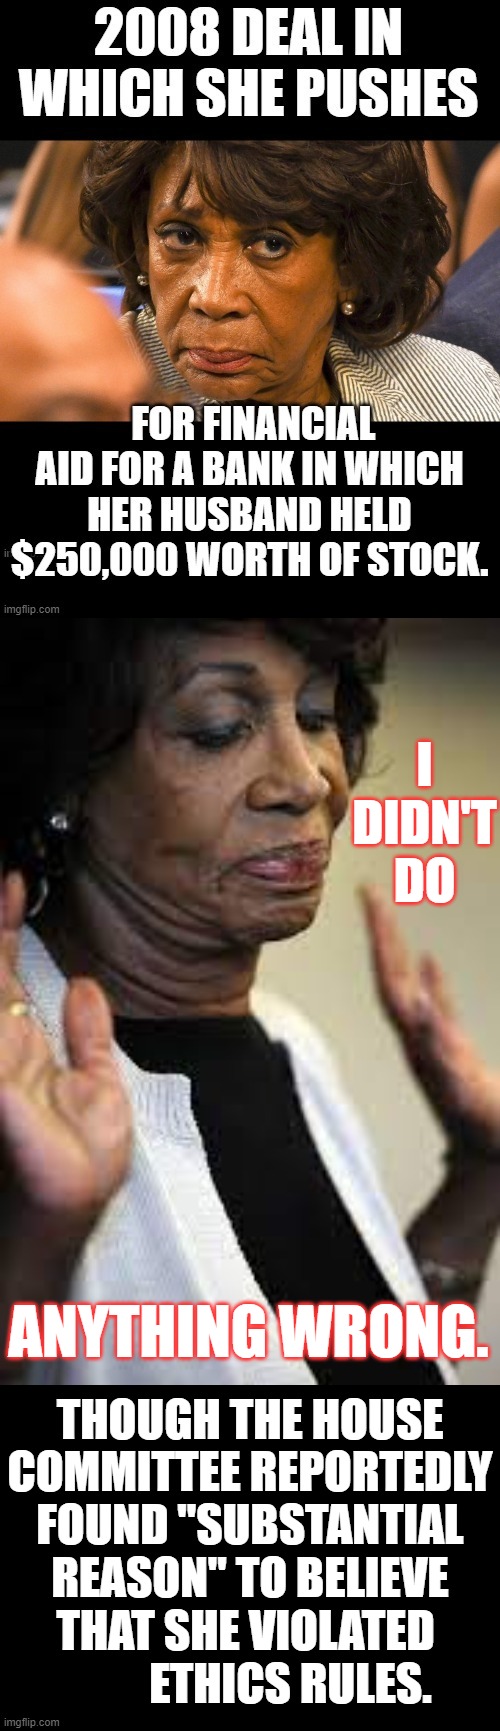 Watching Your Money Disappear... Maxine Waters Conflict Of Interest | I DIDN'T DO; ANYTHING WRONG. THOUGH THE HOUSE COMMITTEE REPORTEDLY FOUND "SUBSTANTIAL REASON" TO BELIEVE THAT SHE VIOLATED            ETHICS RULES. | image tagged in memes,politics,maxine waters,conflict of interest,disappearing,money in politics | made w/ Imgflip meme maker